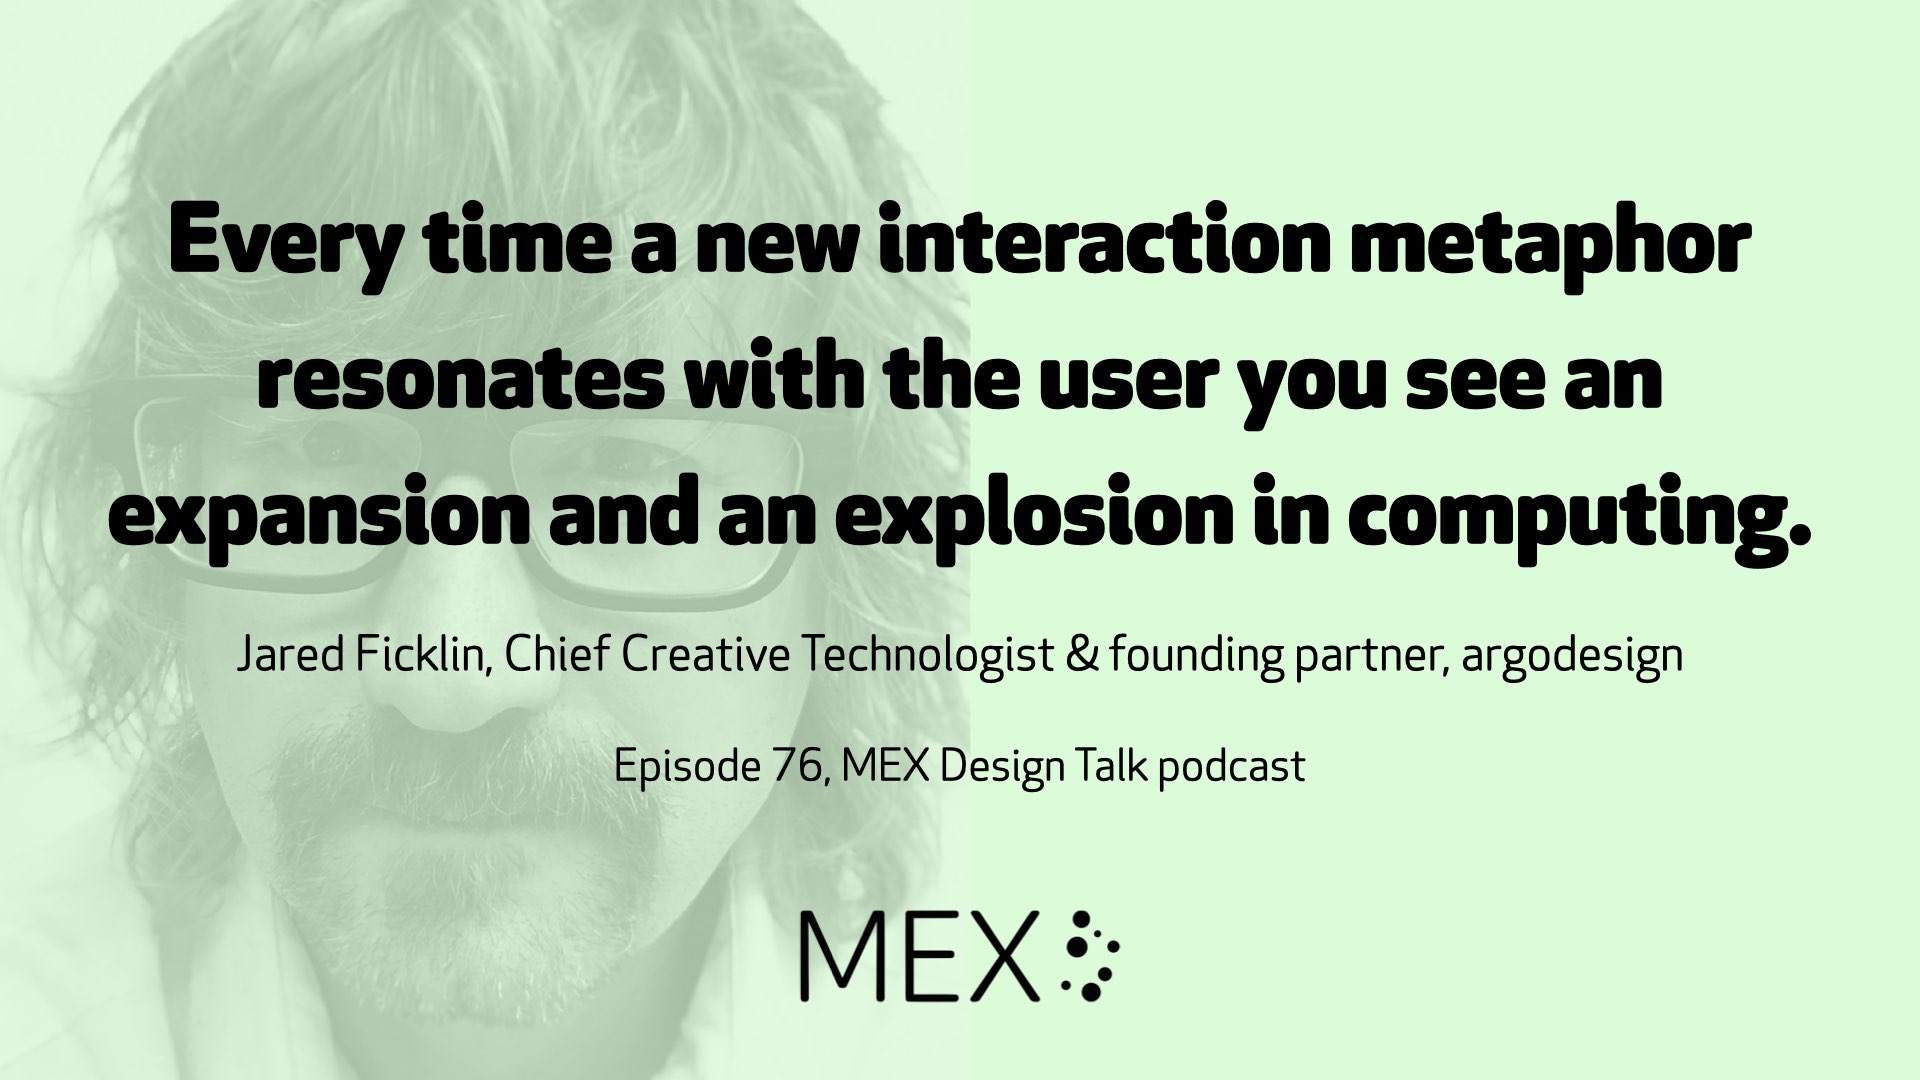 Every time a new interaction metaphor resonates with the user you see an expansion and an explosion in computing. Jared Ficklin, Chief Creative Technologist & founding partner, argodesign Episode 76, MEX Design Talk podcast